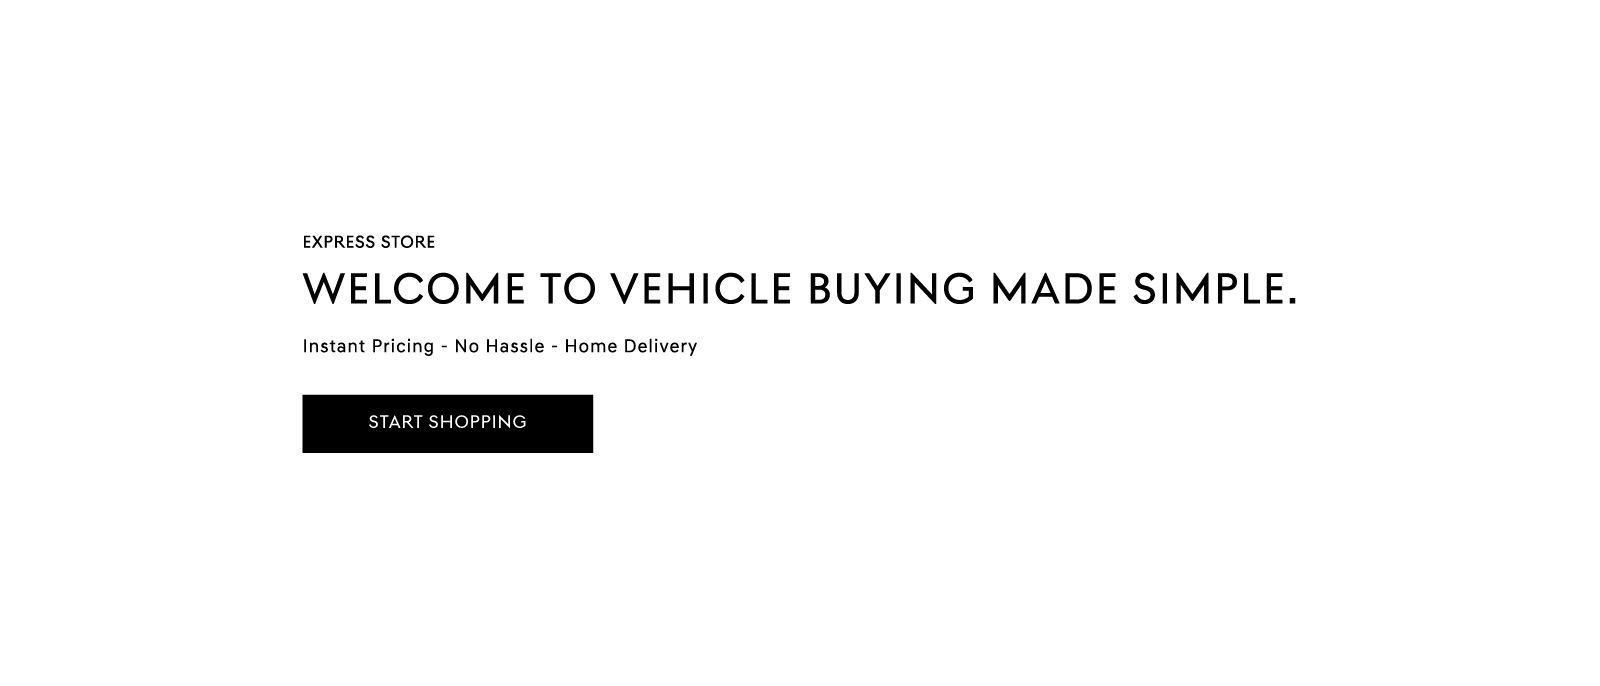 Start Shopping - Home Delivery